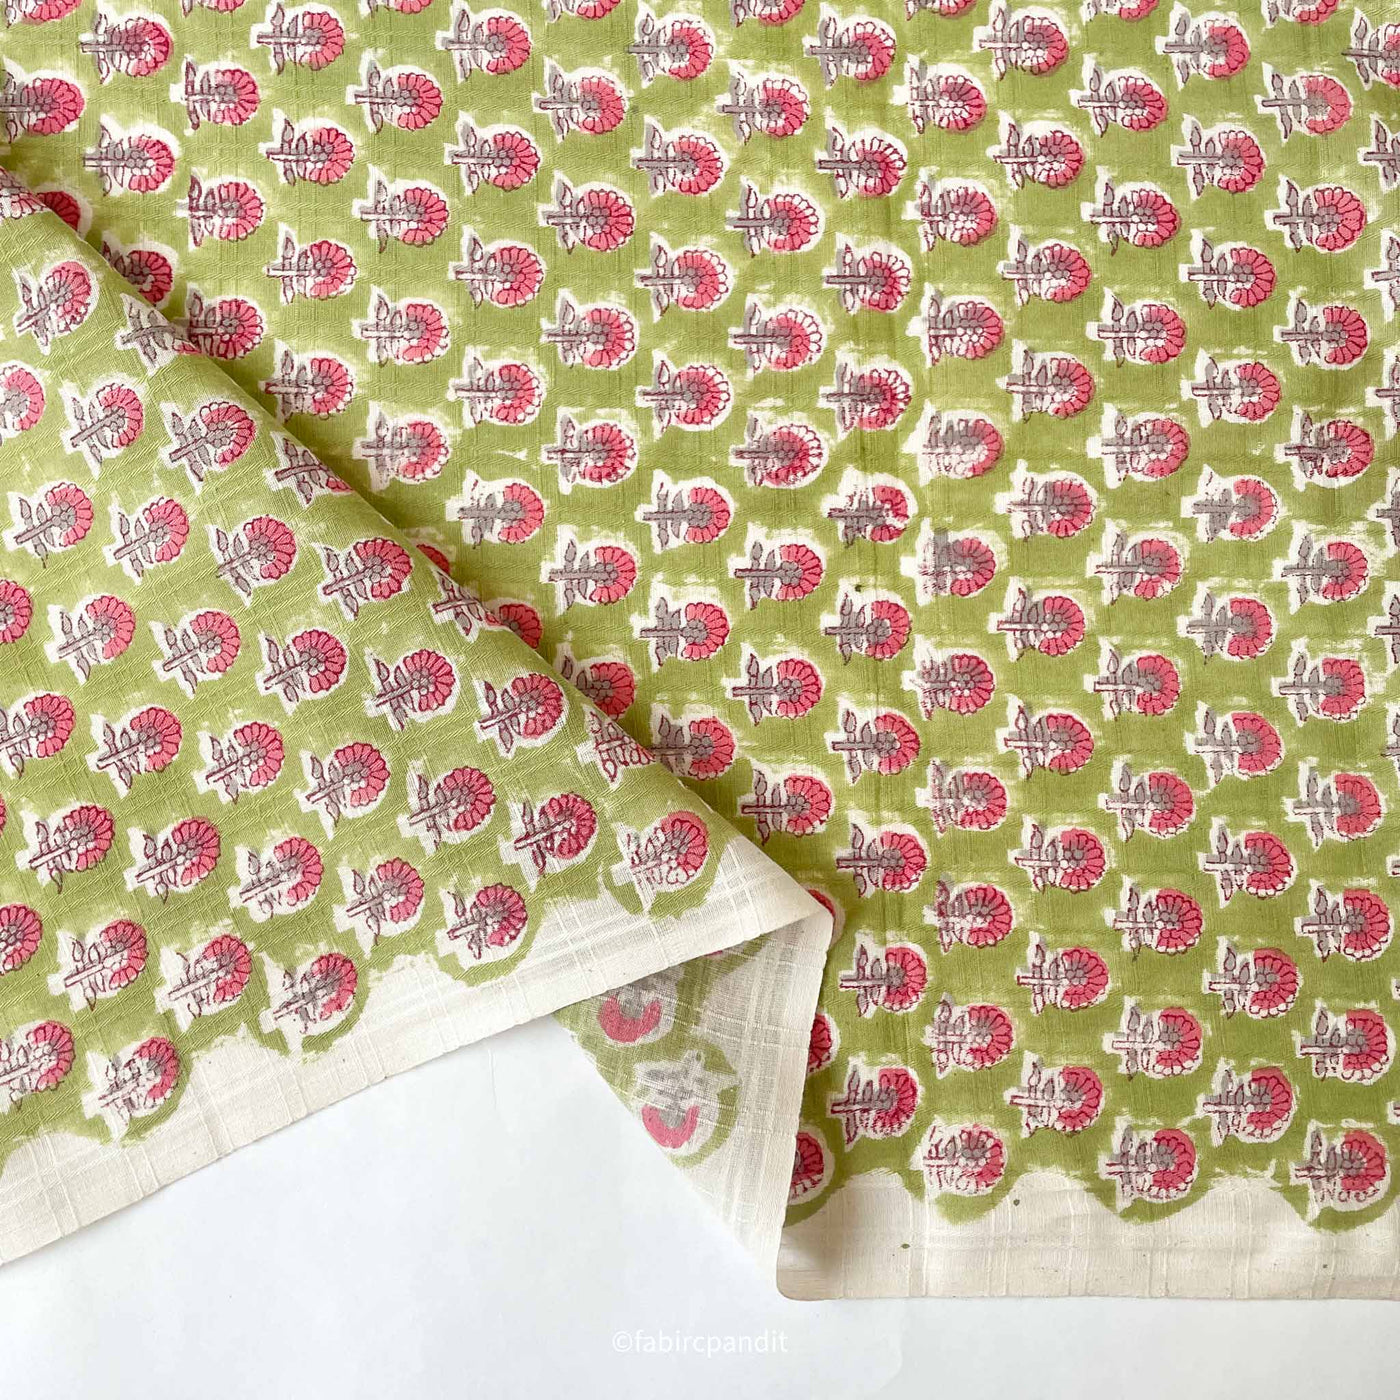 Hand Block Printed Cotton Fabric Cut Piece (CUT PIECE) Green and Pink Mughal Flower Hand Block Printed Pure Cotton Slub (Width 43 inches)